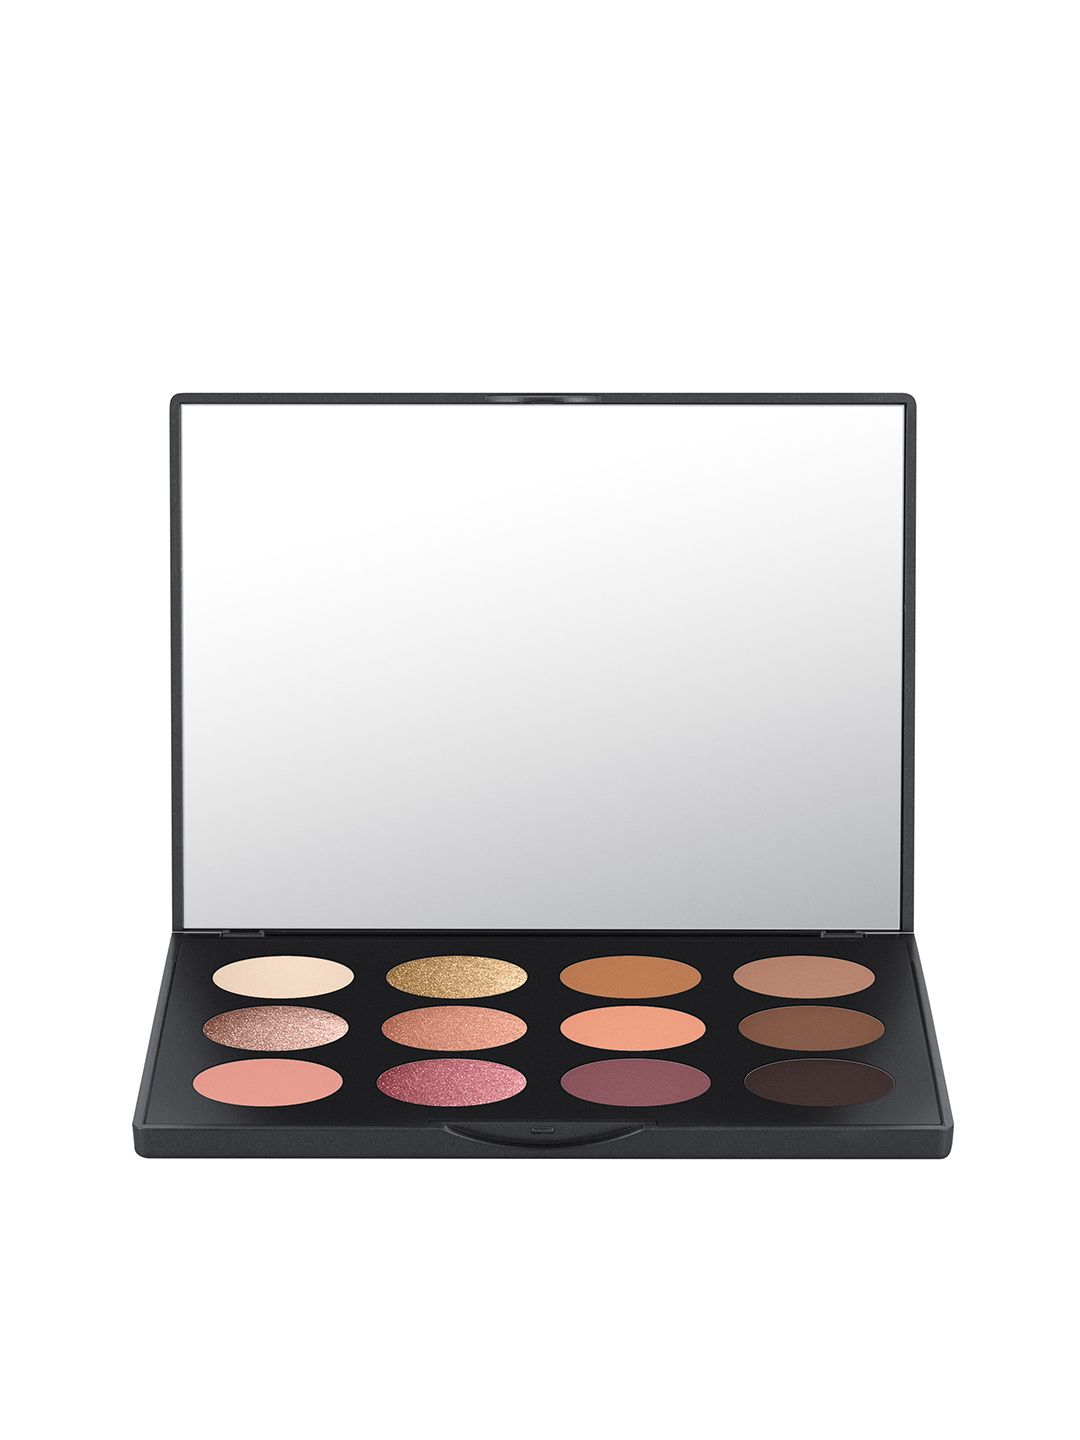 M.A.C Art Library Eyeshadow Palette - Nude Model 17.2 g Price in India